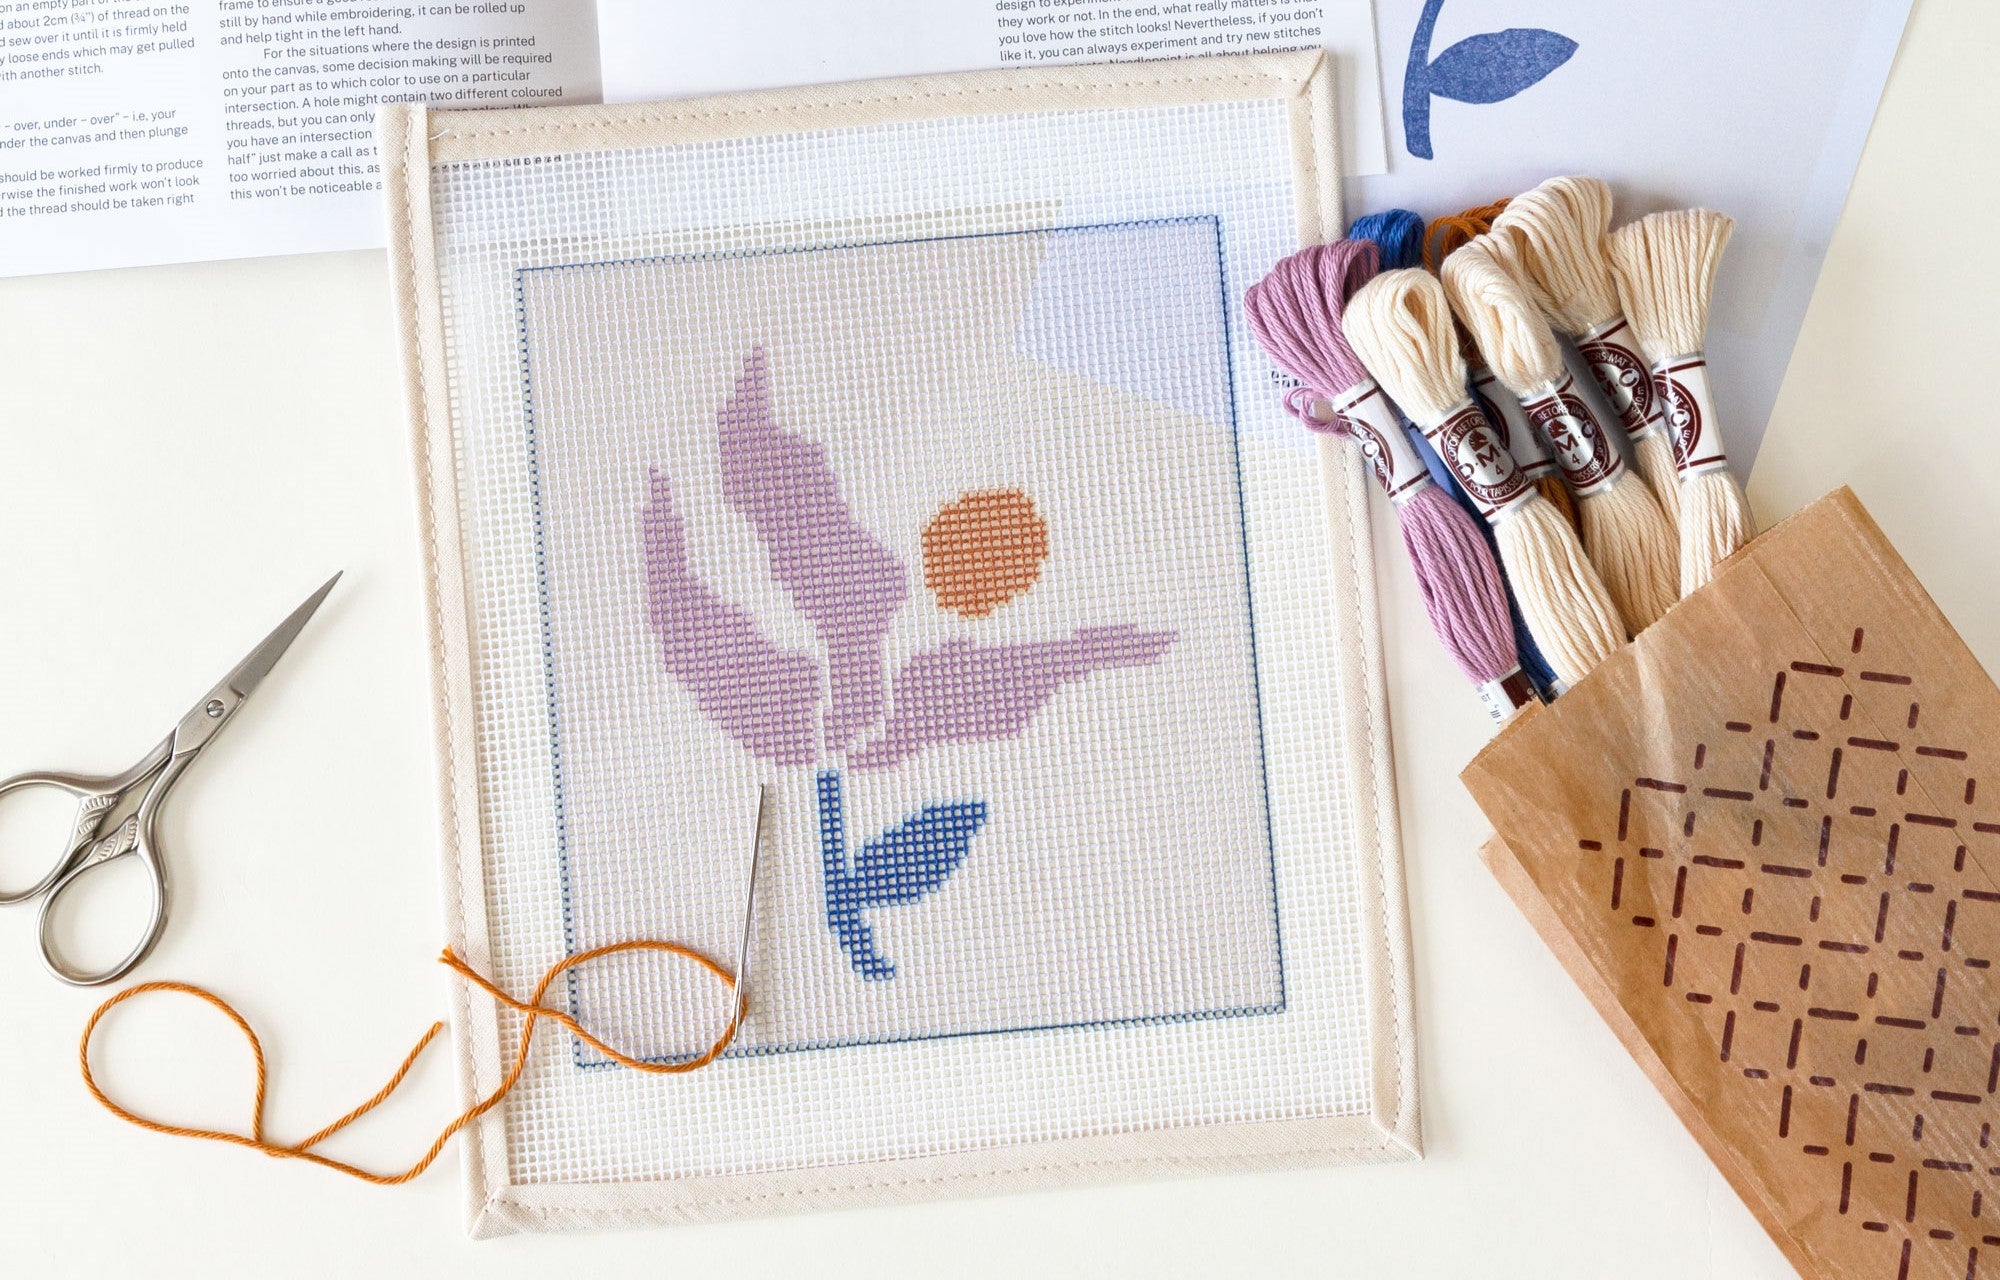 How to Needlepoint: A Guide for Beginners